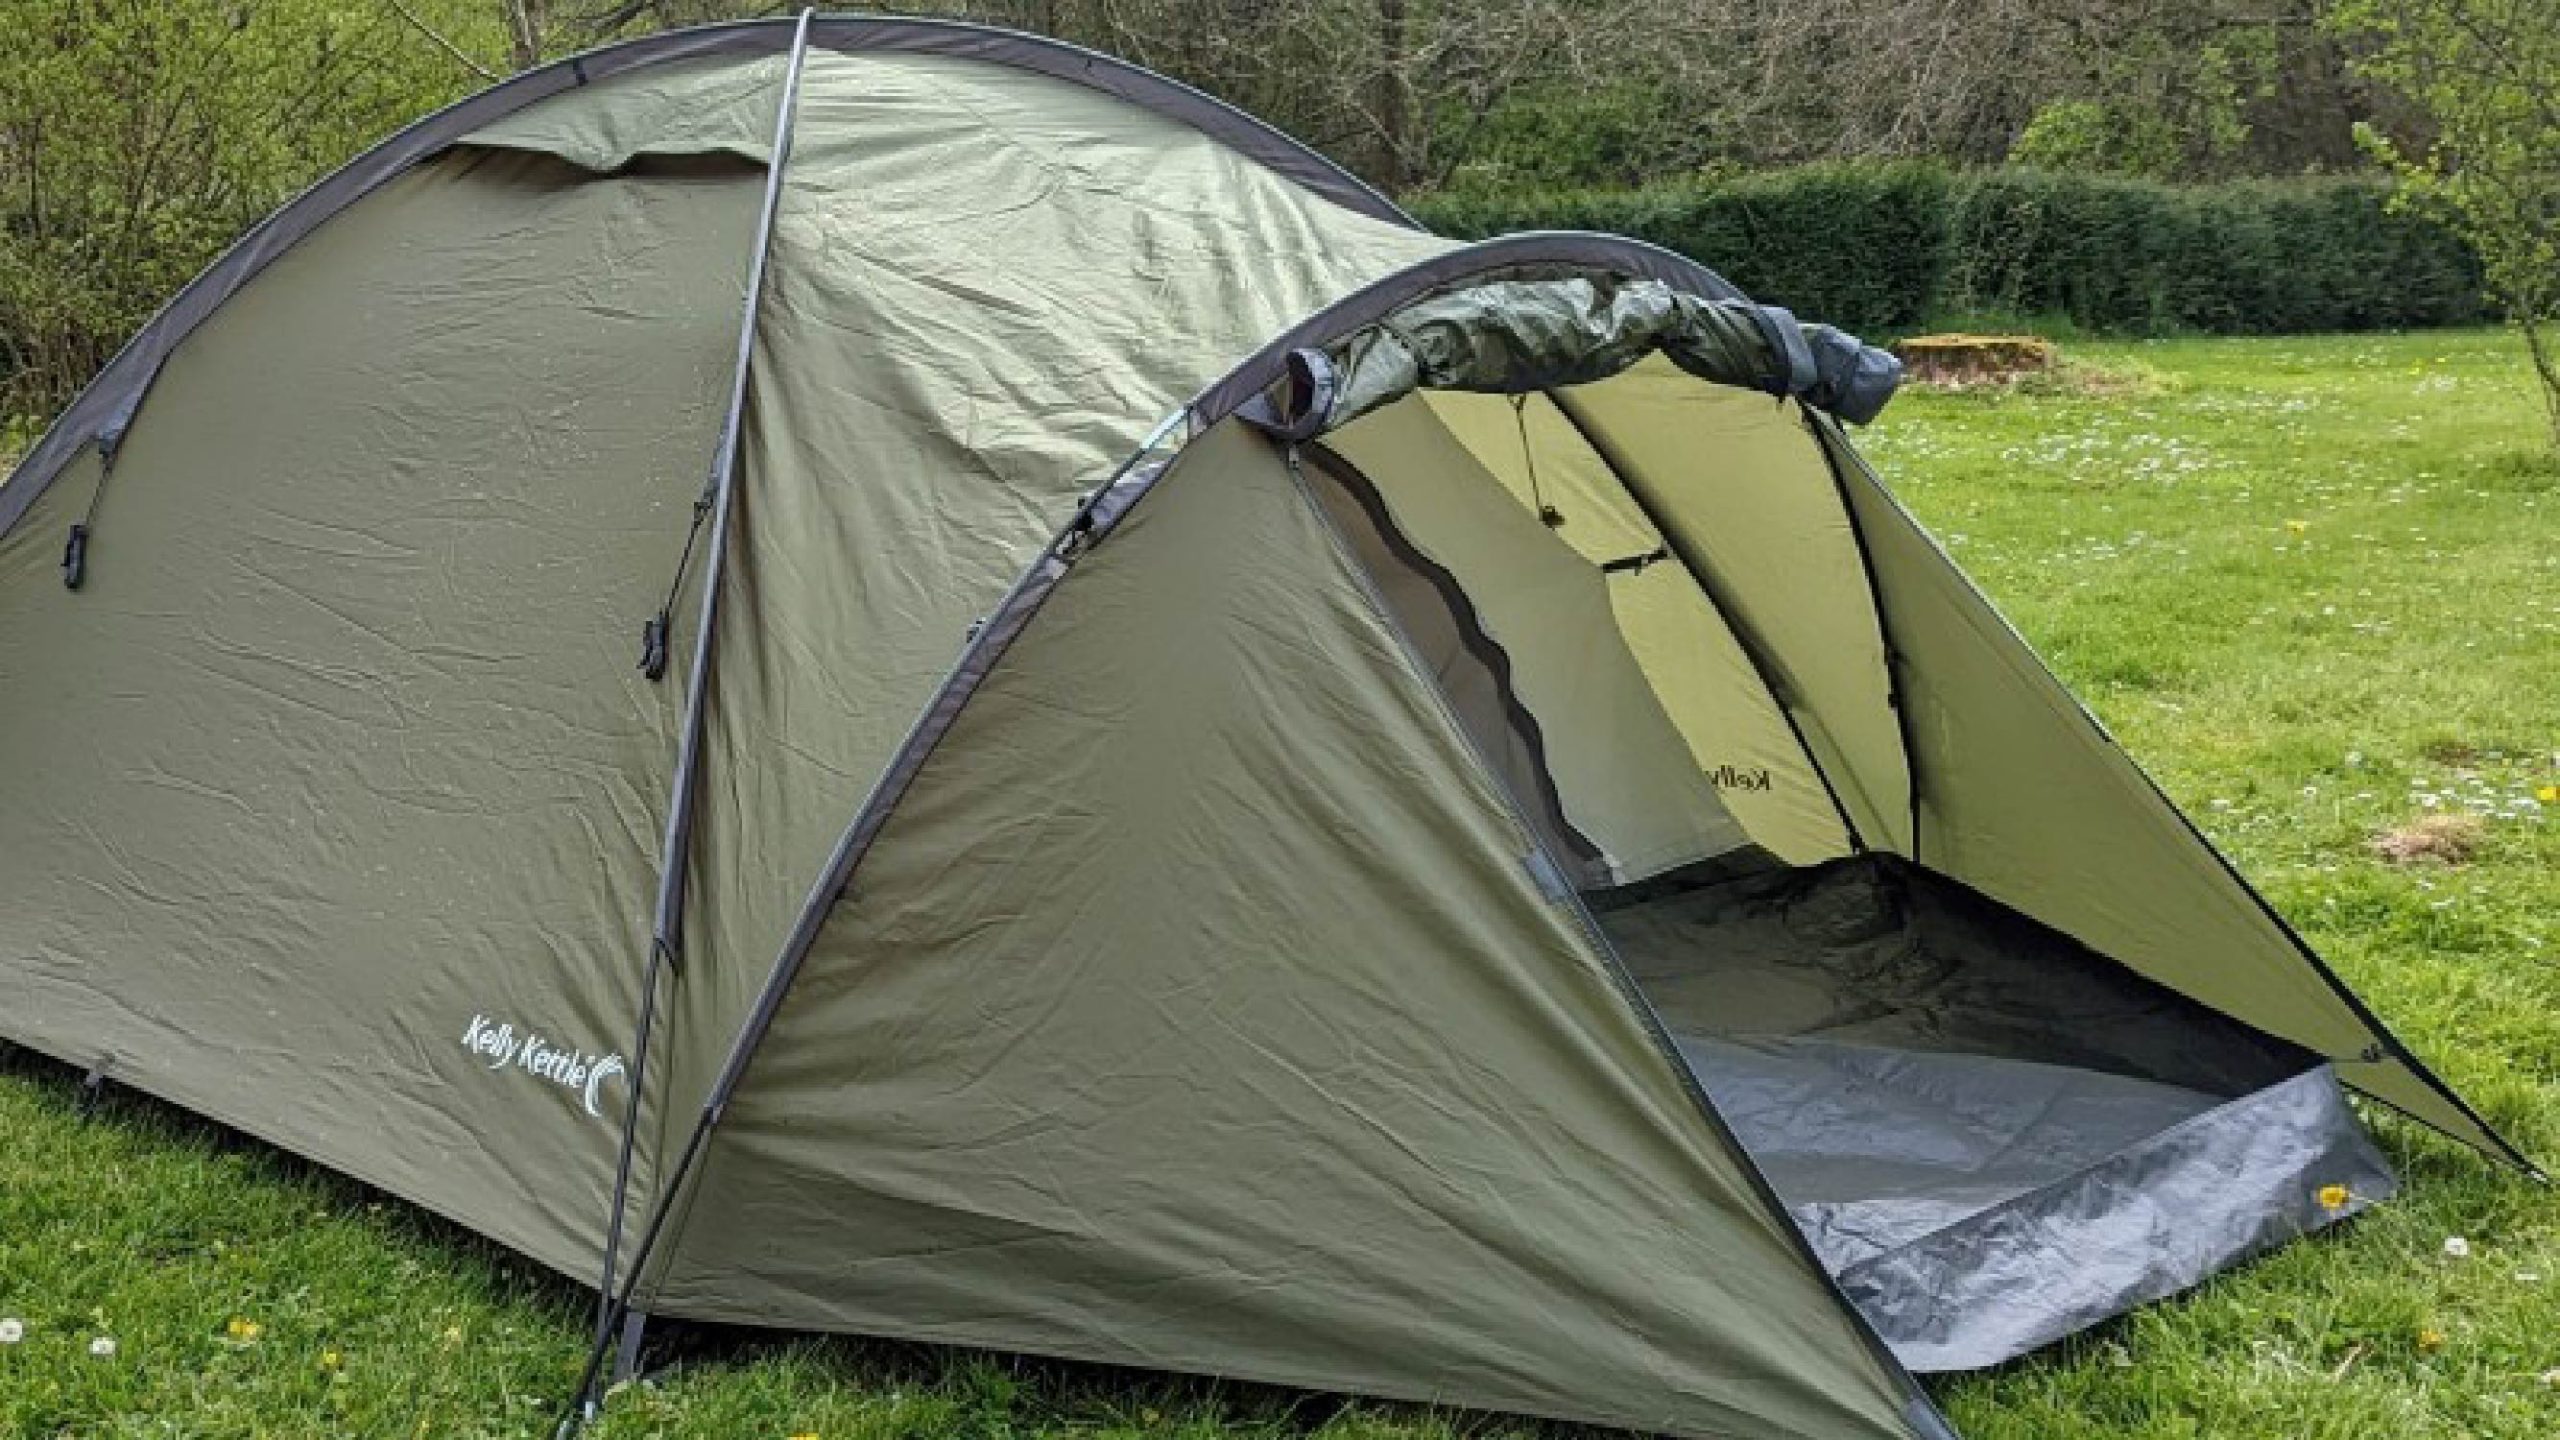 What Size Tent Do I Need?